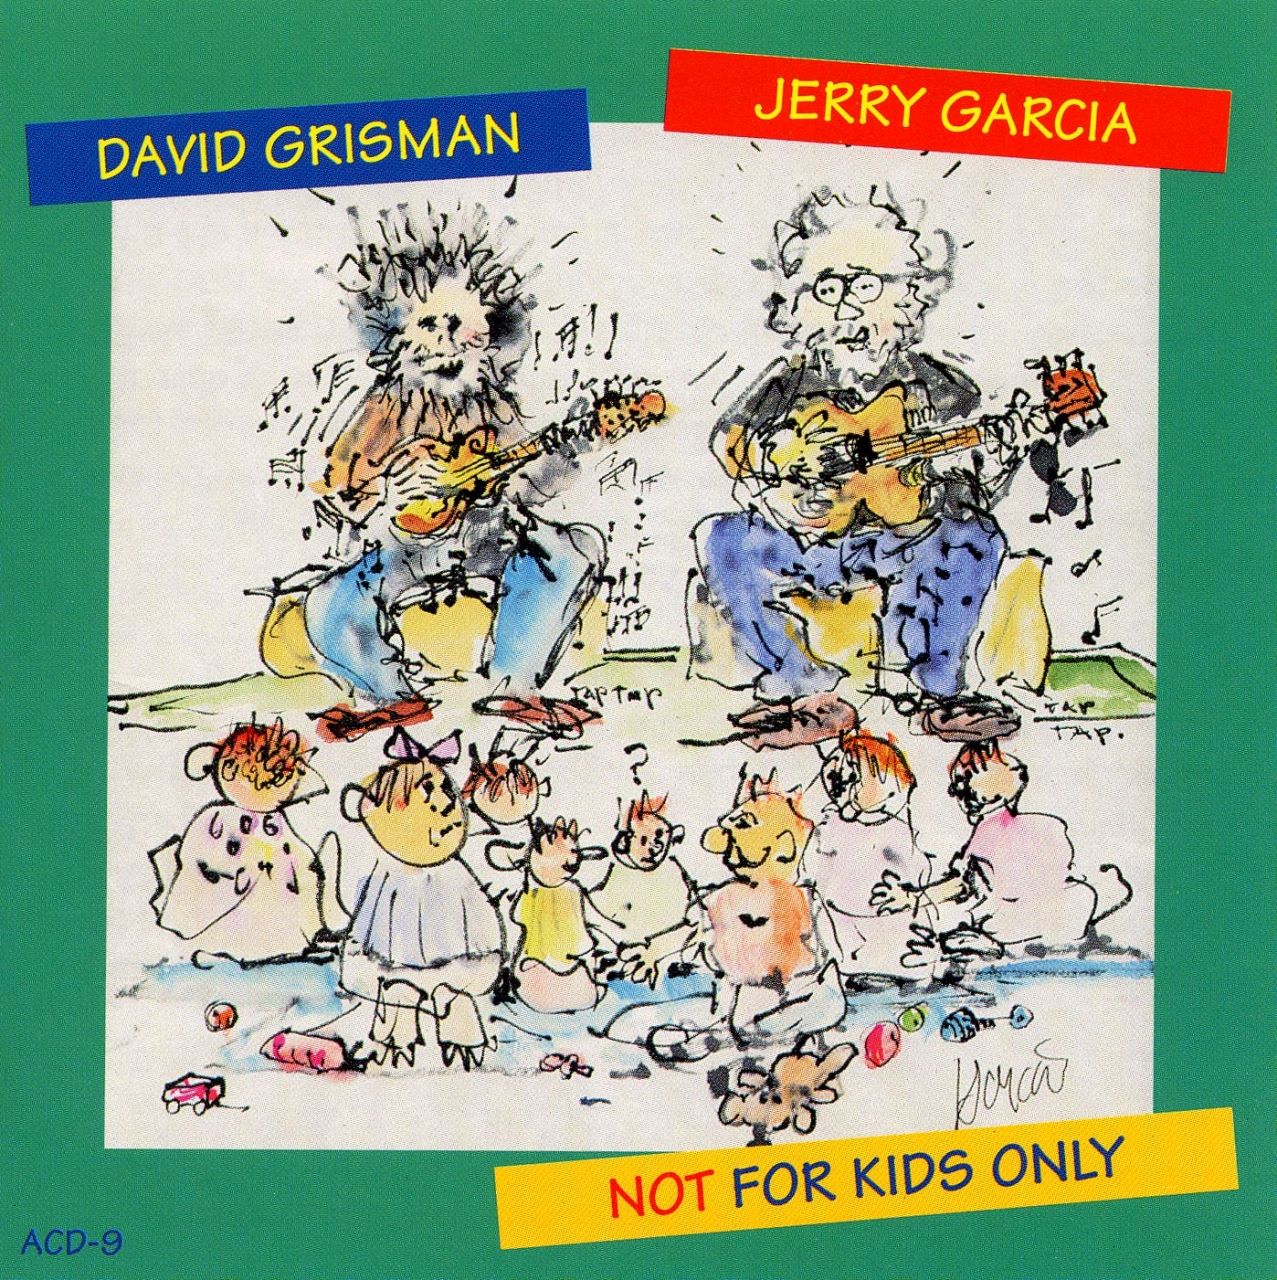 Jerry Garcia & David Grisman - Not For Kids Only cover album